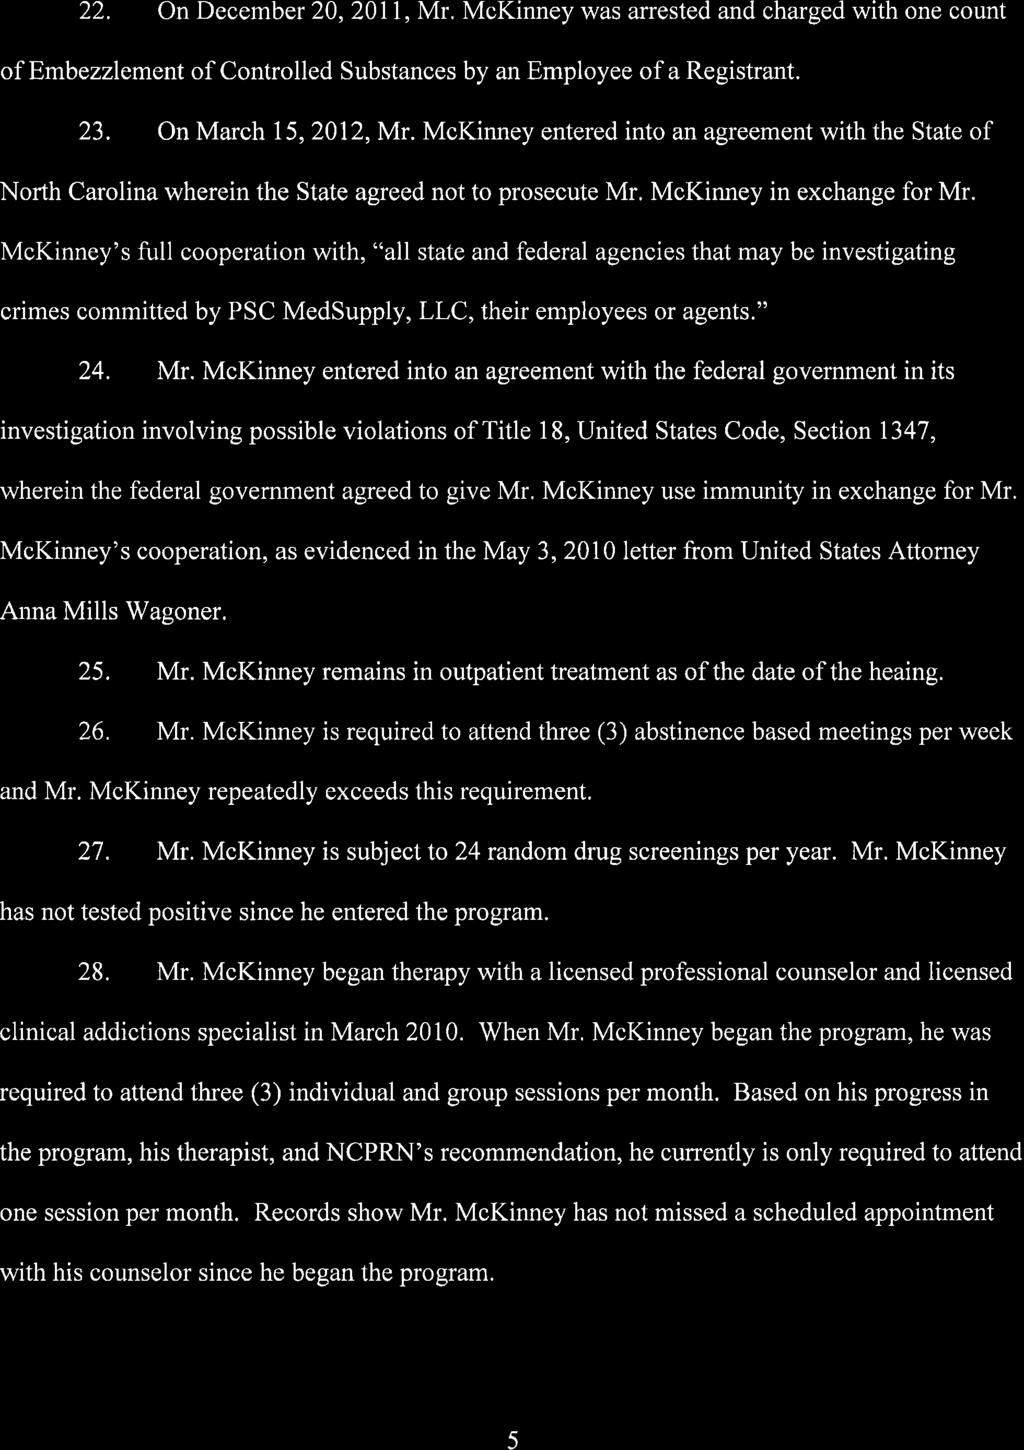 22. On December20,20ll, Mr, McKinney was arrested and charged with one count of Embezzlement of Controlled Substances by an Employee of a Registrant. 23. On March 15,2012, Mr.